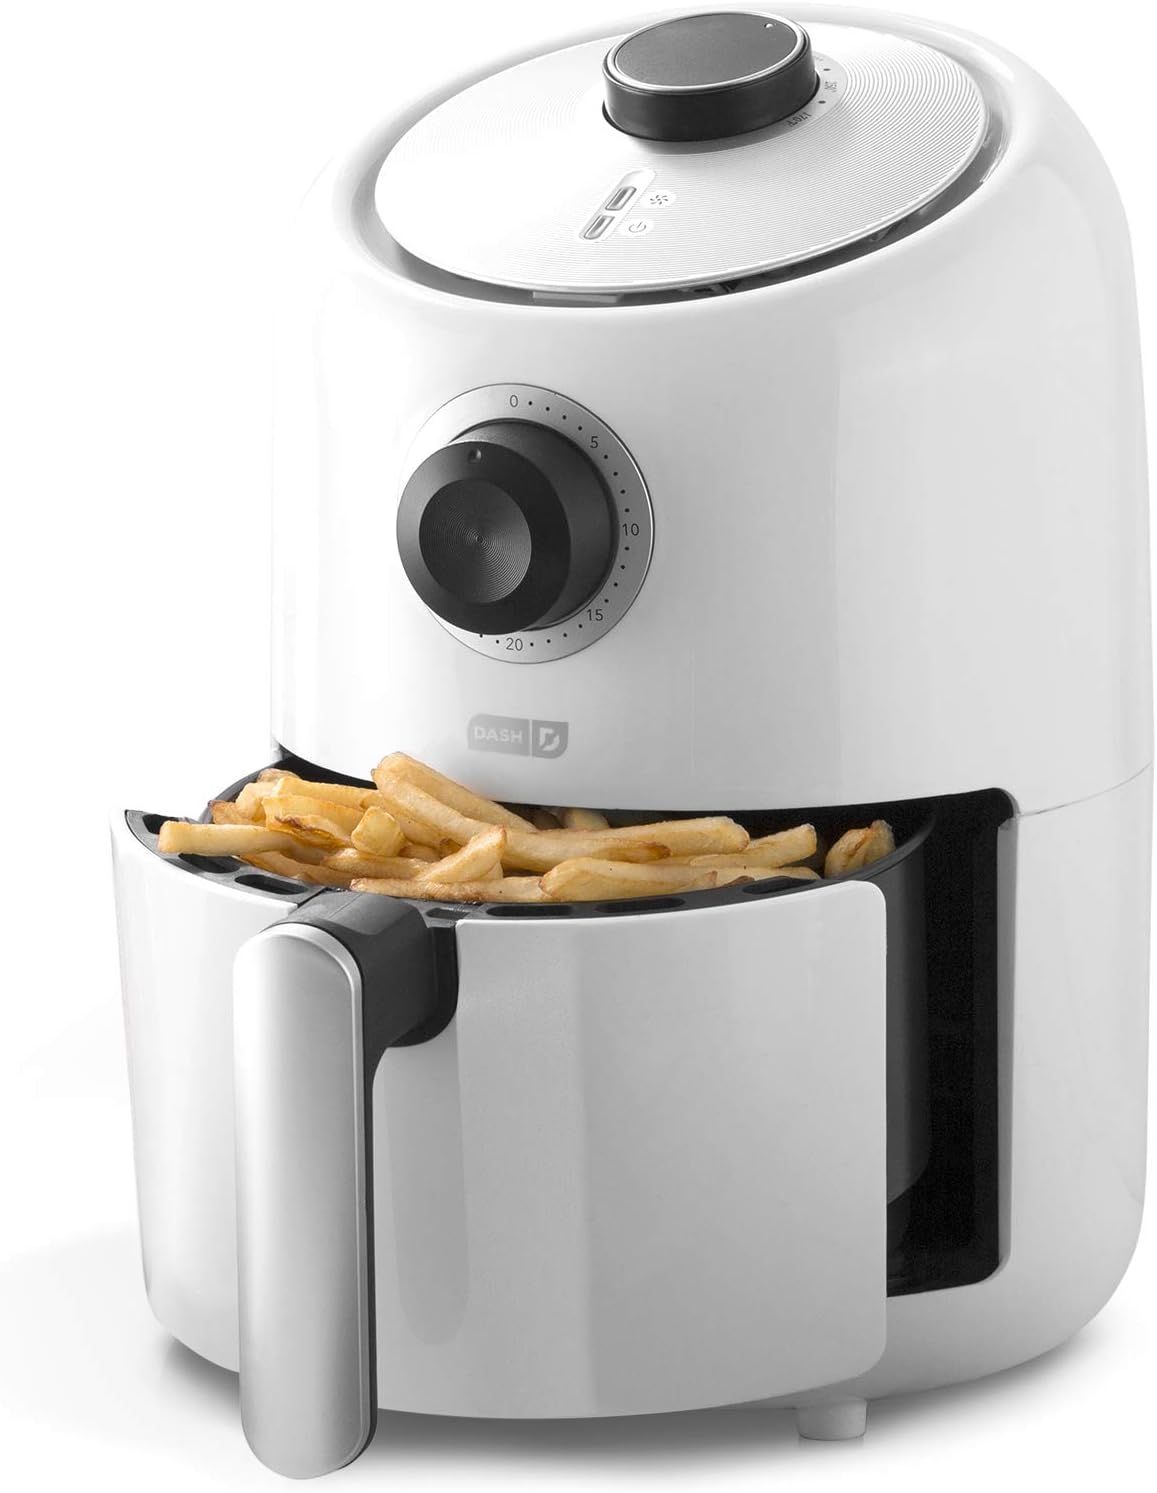 Dash Compact Air Fryer Oven Cooker with Temperature Control, Non-stick Fry Basket, Recipe Guide +... | Amazon (US)